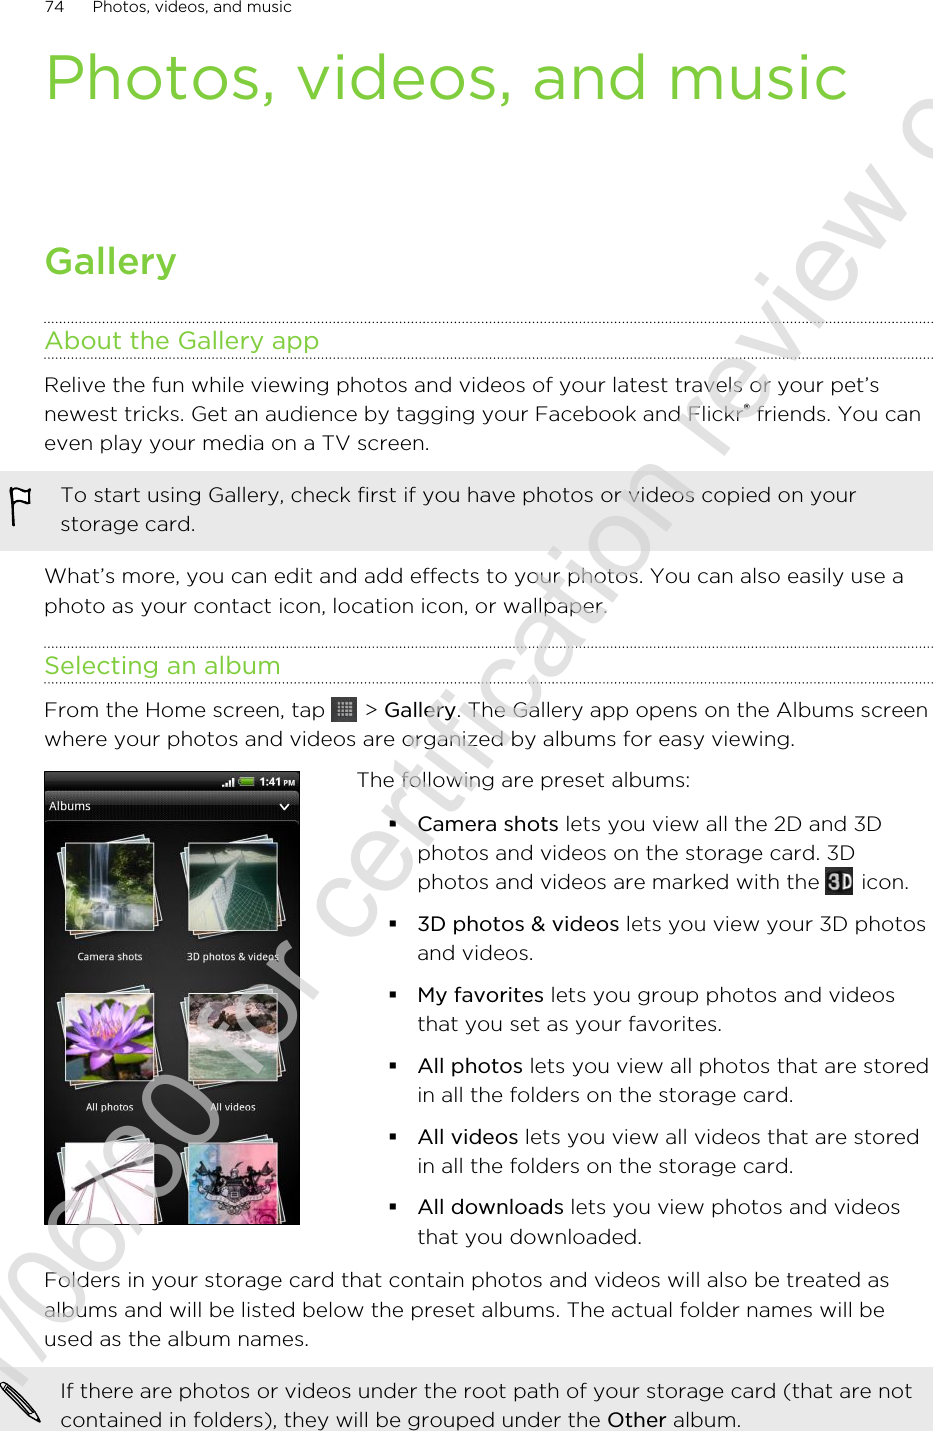 Photos, videos, and musicGalleryAbout the Gallery appRelive the fun while viewing photos and videos of your latest travels or your pet’snewest tricks. Get an audience by tagging your Facebook and Flickr® friends. You caneven play your media on a TV screen.To start using Gallery, check first if you have photos or videos copied on yourstorage card.What’s more, you can edit and add effects to your photos. You can also easily use aphoto as your contact icon, location icon, or wallpaper.Selecting an albumFrom the Home screen, tap   &gt; Gallery. The Gallery app opens on the Albums screenwhere your photos and videos are organized by albums for easy viewing.The following are preset albums:§Camera shots lets you view all the 2D and 3Dphotos and videos on the storage card. 3Dphotos and videos are marked with the   icon.§3D photos &amp; videos lets you view your 3D photosand videos.§My favorites lets you group photos and videosthat you set as your favorites.§All photos lets you view all photos that are storedin all the folders on the storage card.§All videos lets you view all videos that are storedin all the folders on the storage card.§All downloads lets you view photos and videosthat you downloaded.Folders in your storage card that contain photos and videos will also be treated asalbums and will be listed below the preset albums. The actual folder names will beused as the album names.If there are photos or videos under the root path of your storage card (that are notcontained in folders), they will be grouped under the Other album.74 Photos, videos, and music2011/06/30 for certification review only